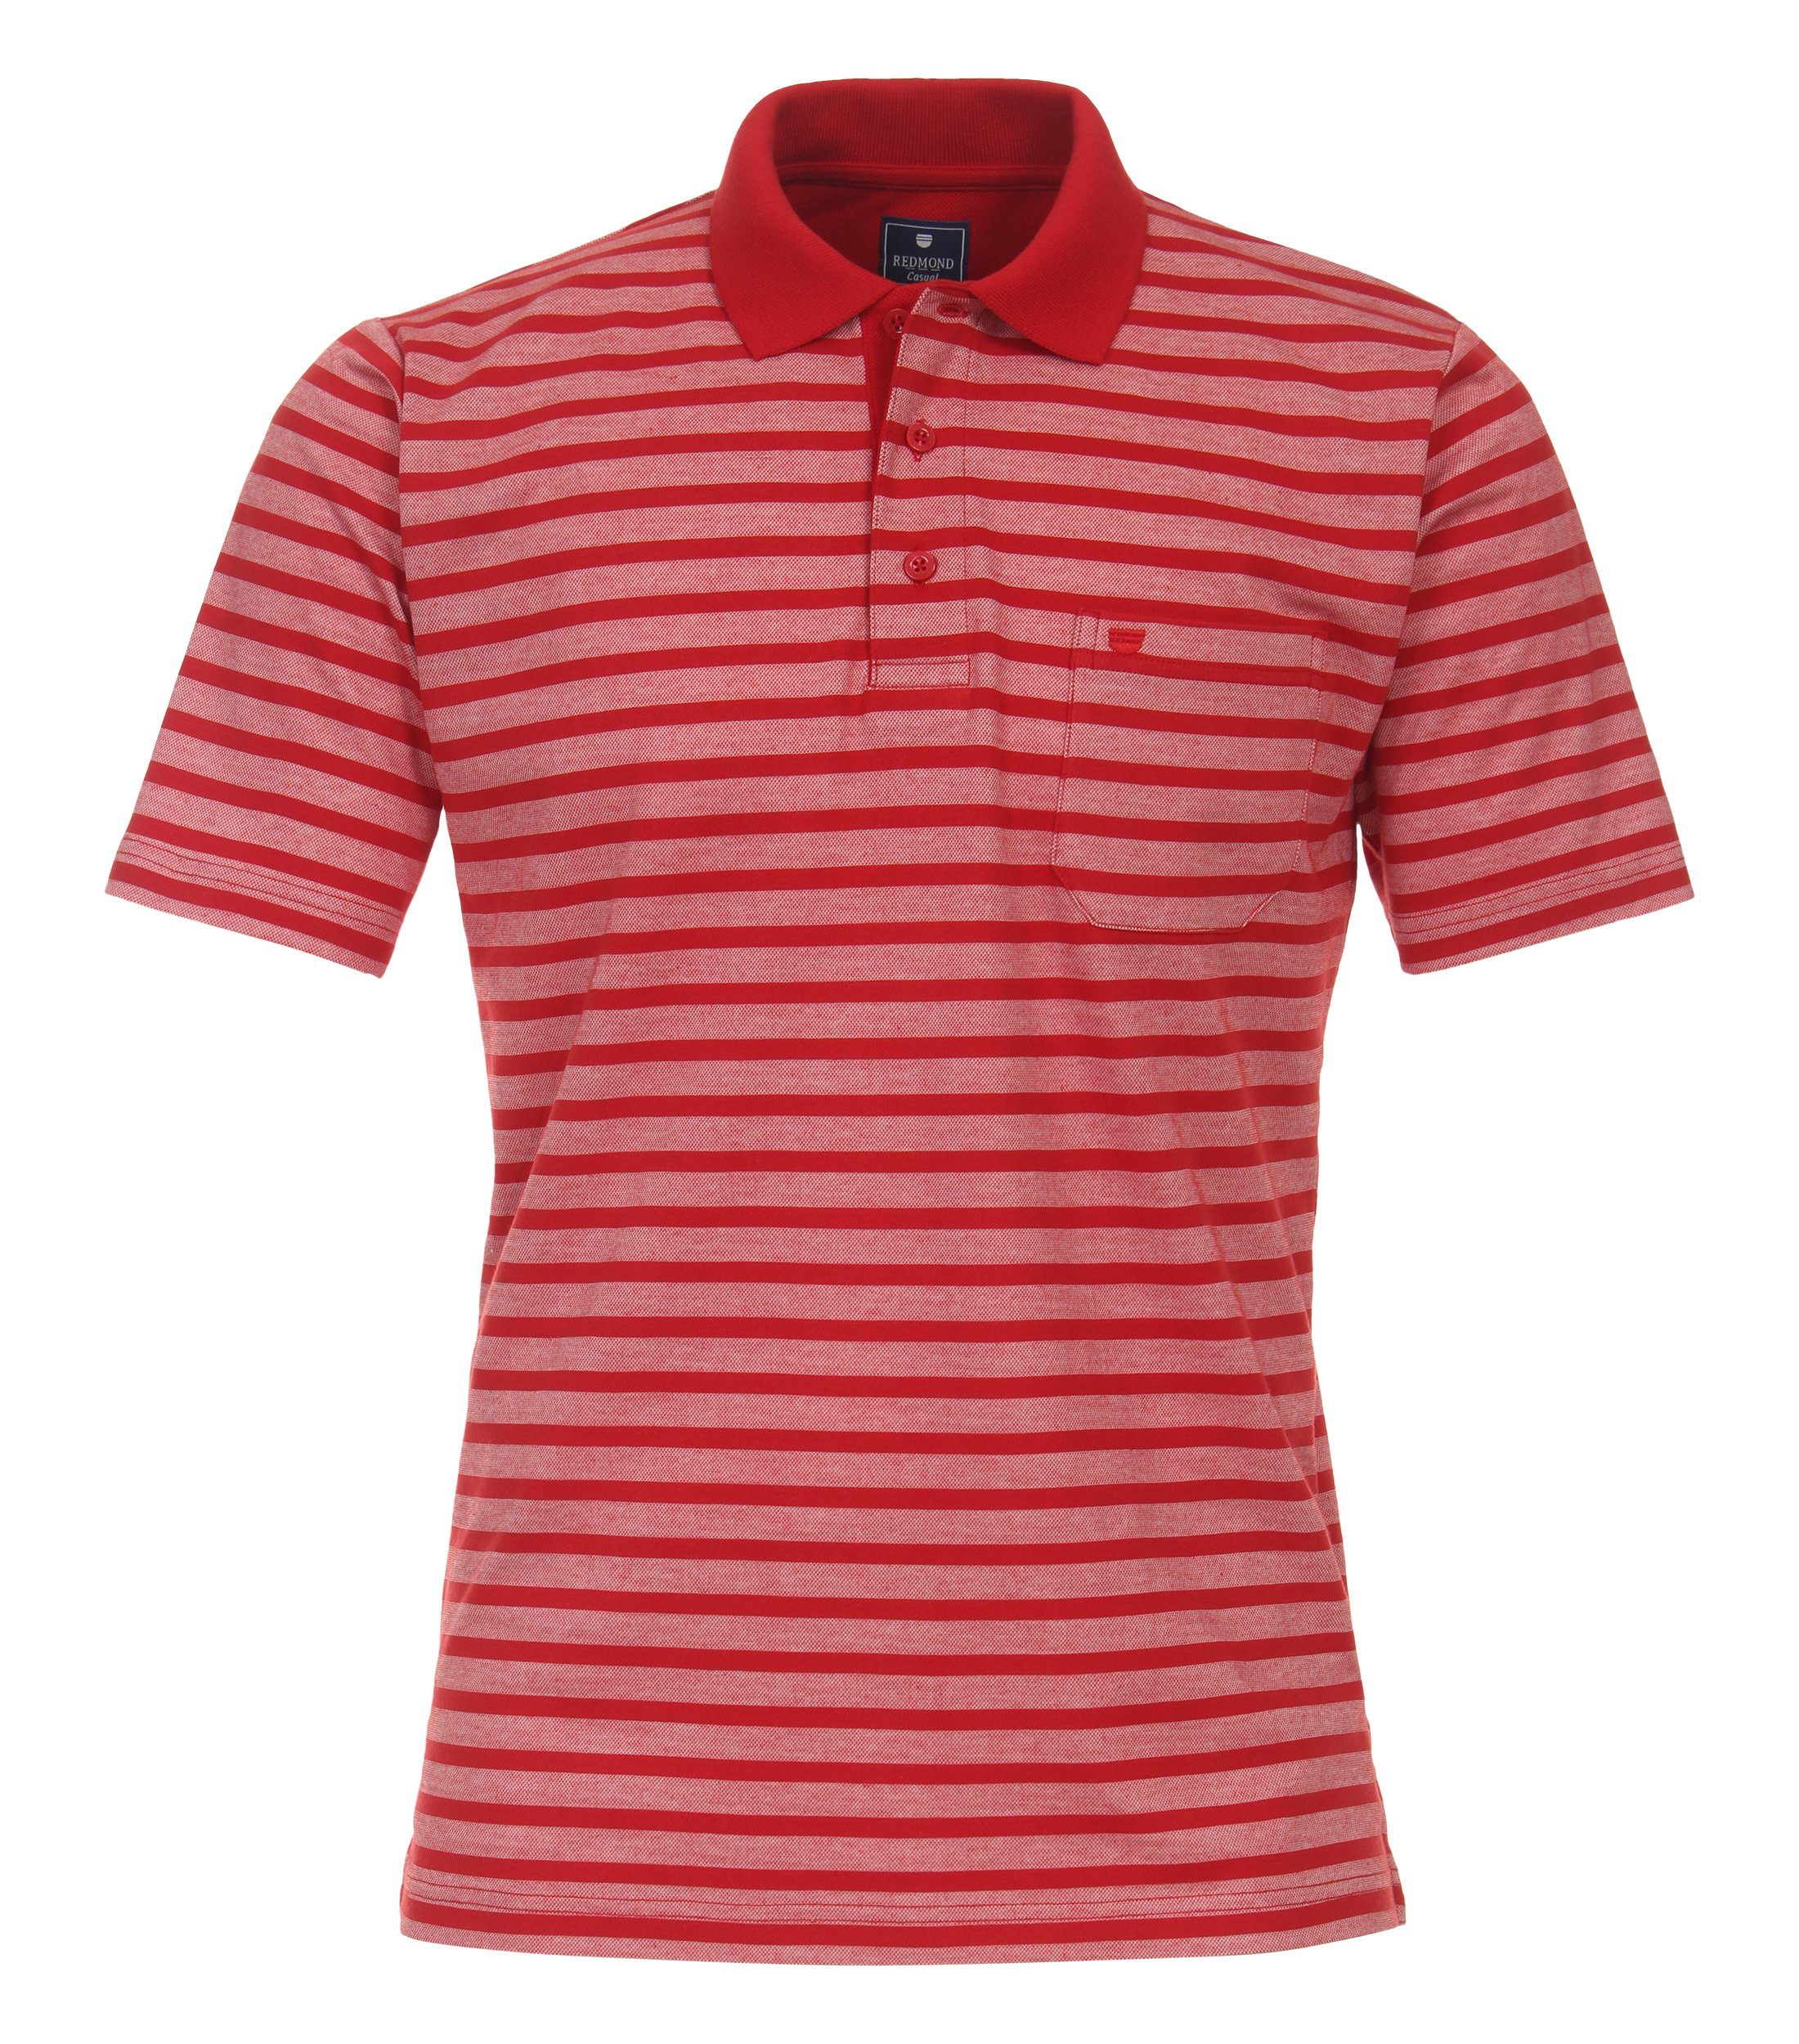 Redmond rot 50 Poloshirt andere Muster